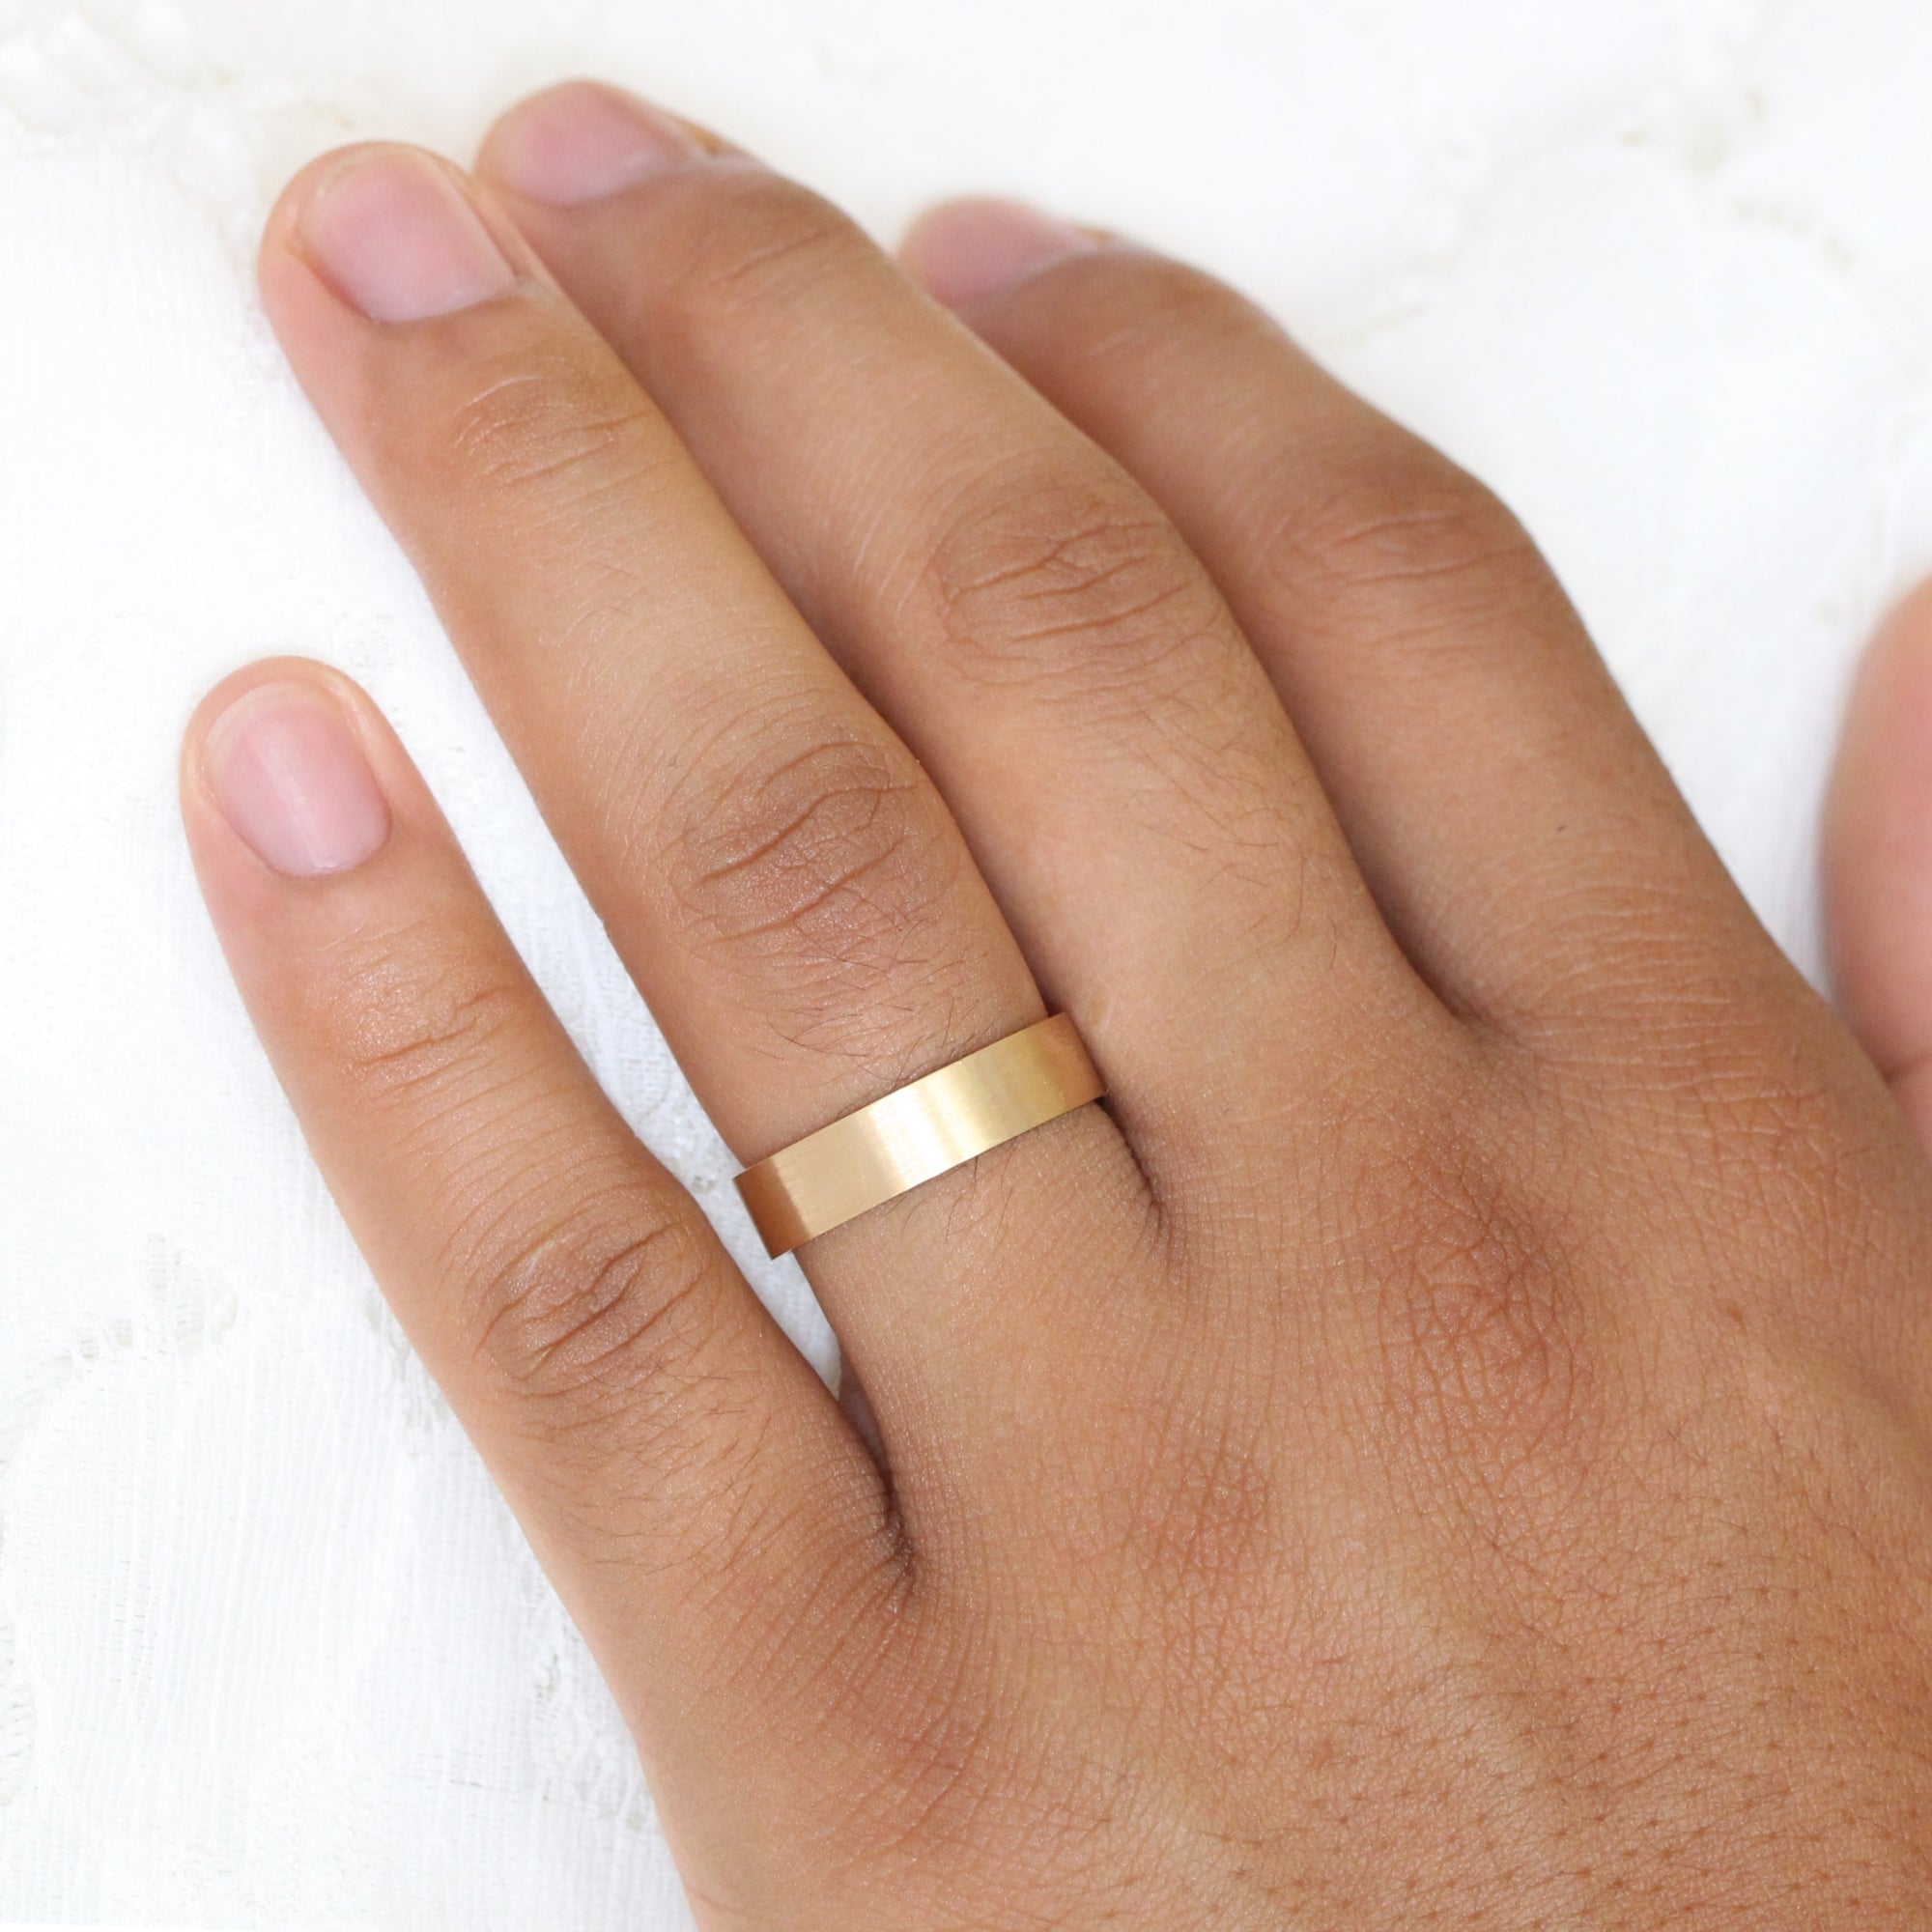 11 Ethical Men's Wedding Bands From Sustainable Brands - The Good Trade